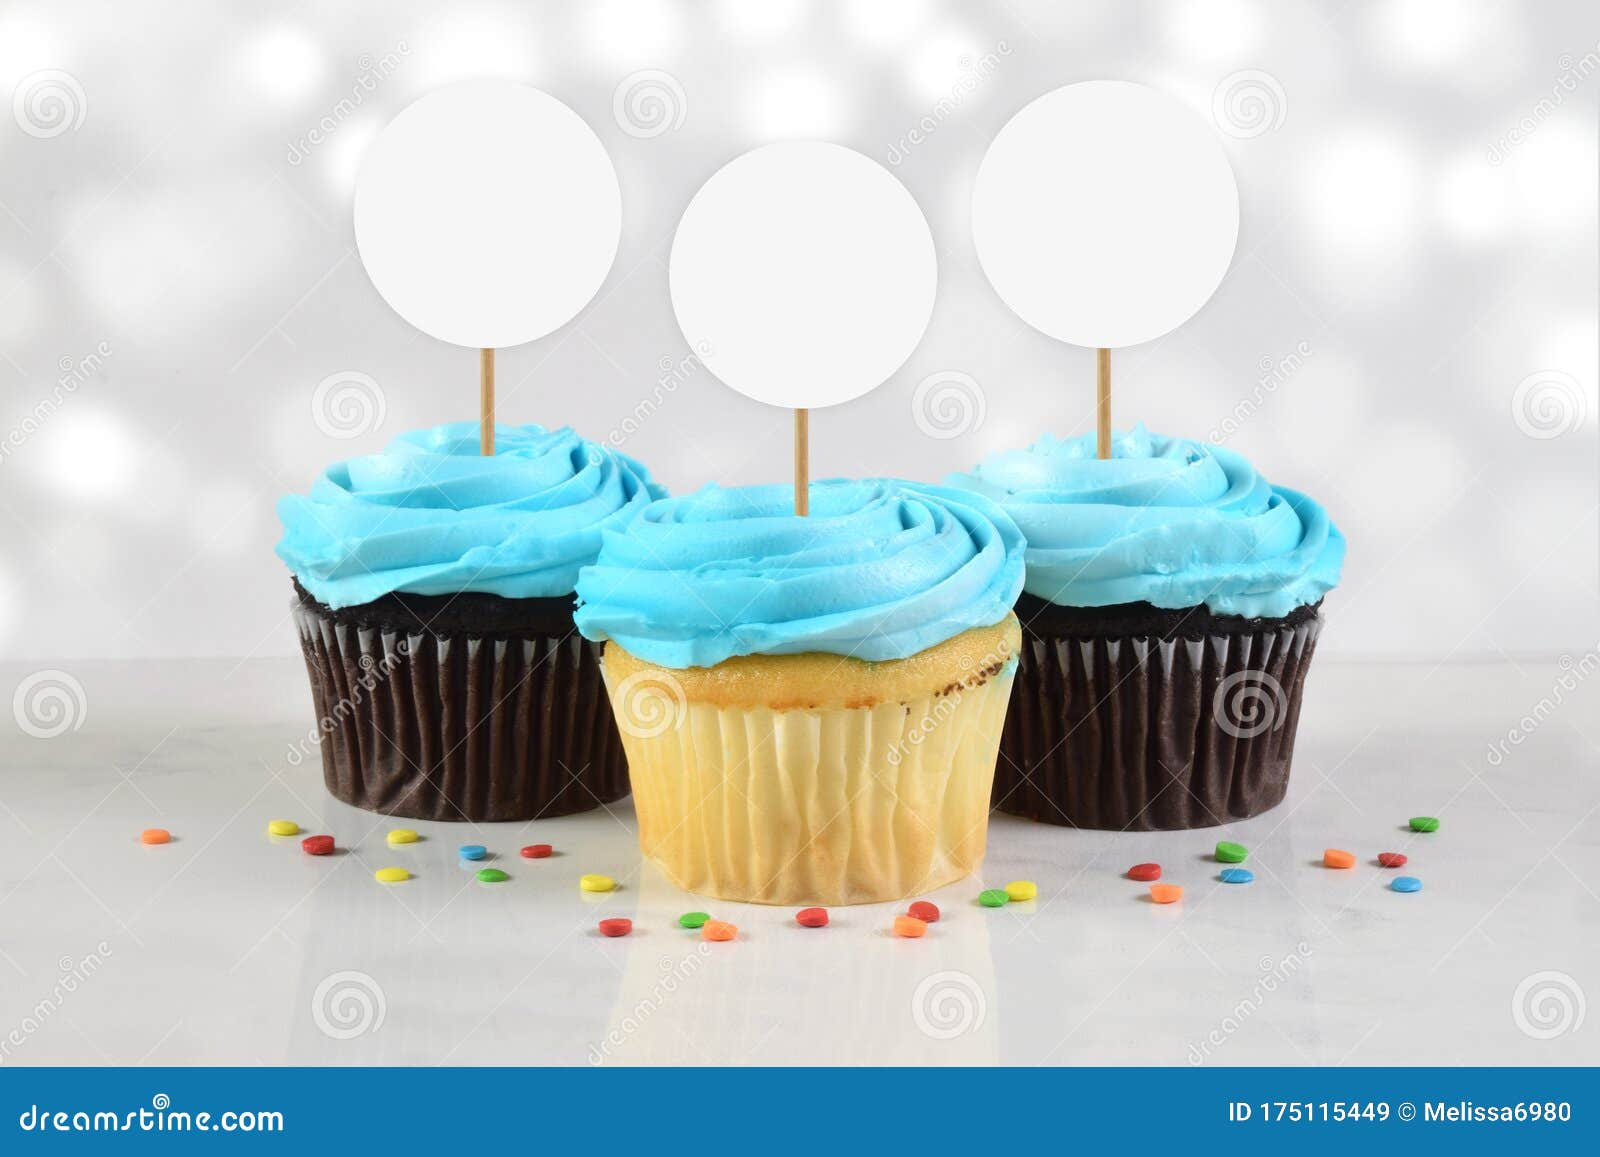 cupcakes mockup with three blue frosted cupcakes